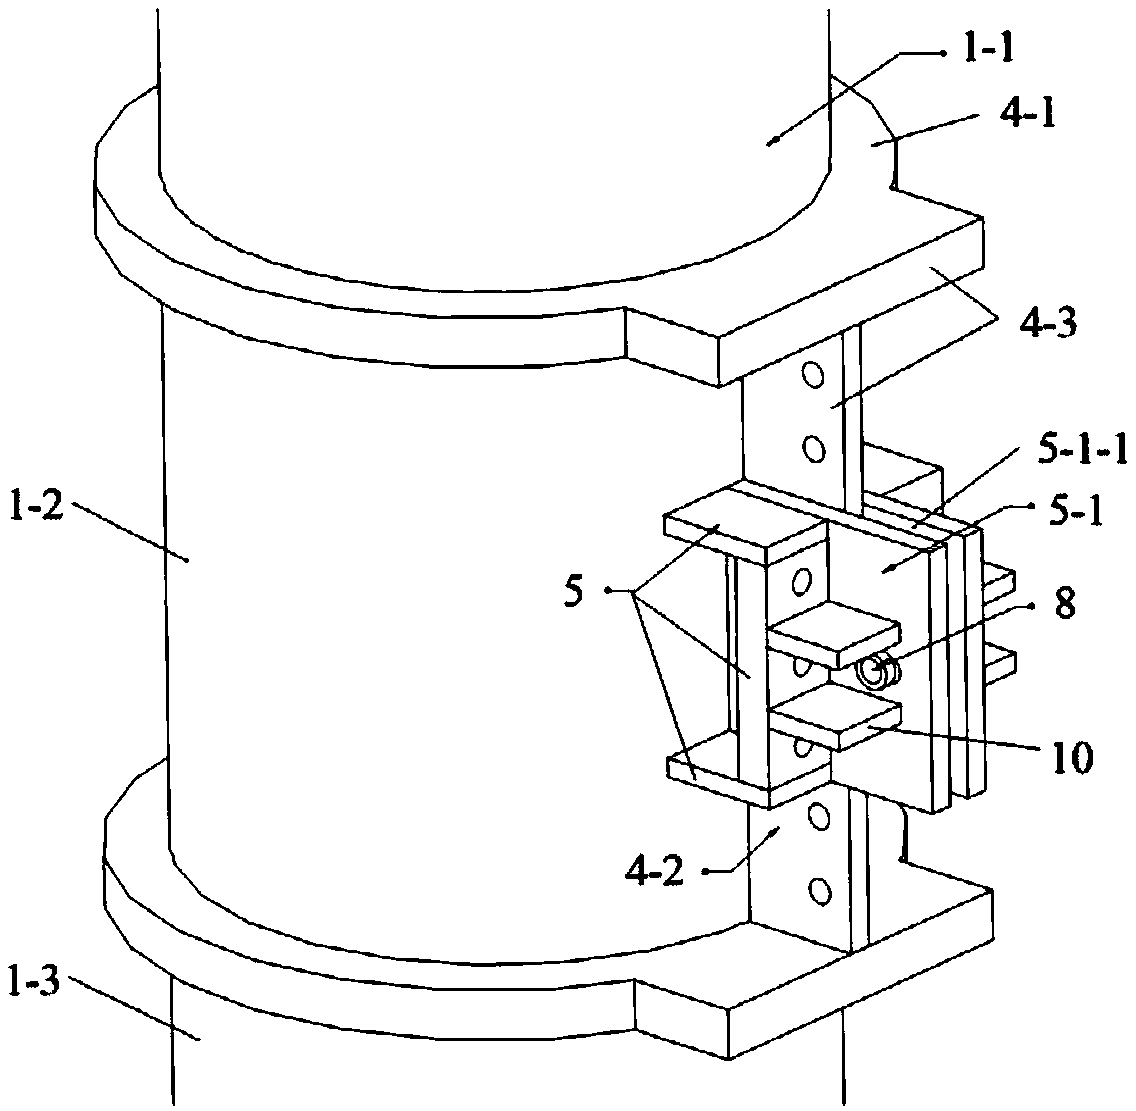 Self-resetting concrete-filled circular steel tube frame beam-column joint with energy dissipation parts on webs